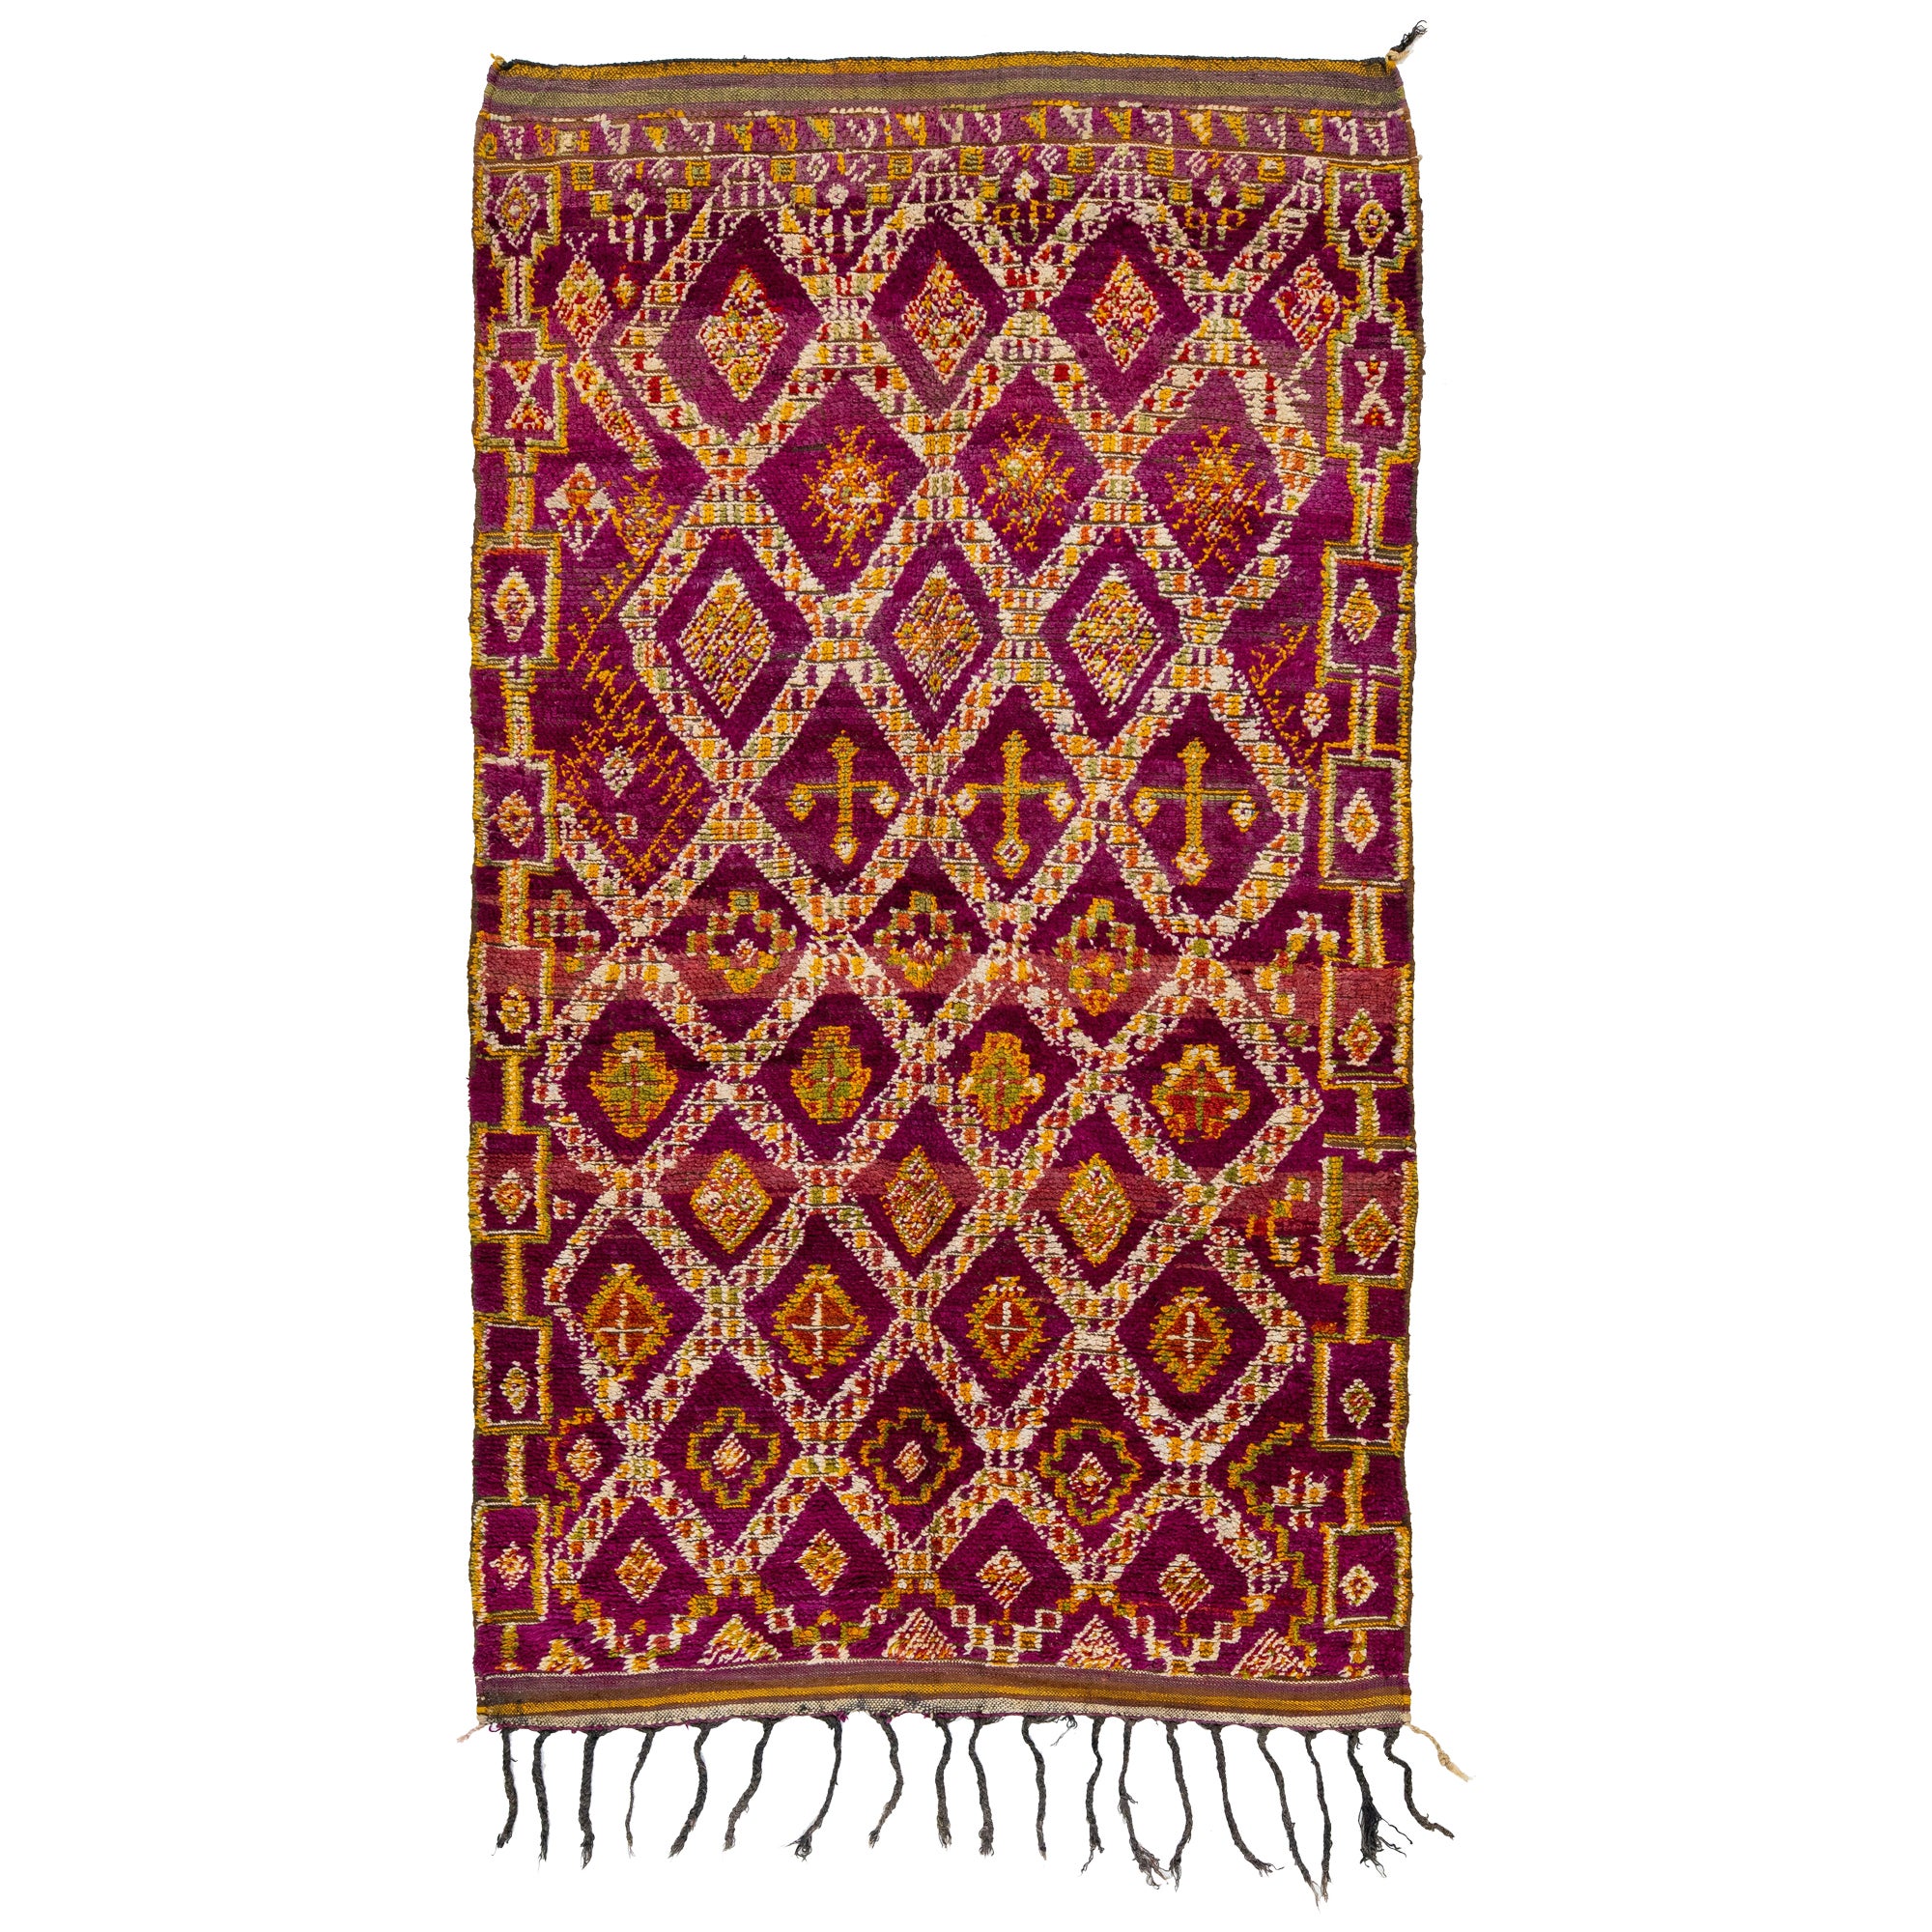 Mid-20th Century Vintage Tribal Moroccan Wool Rug In Purple  For Sale